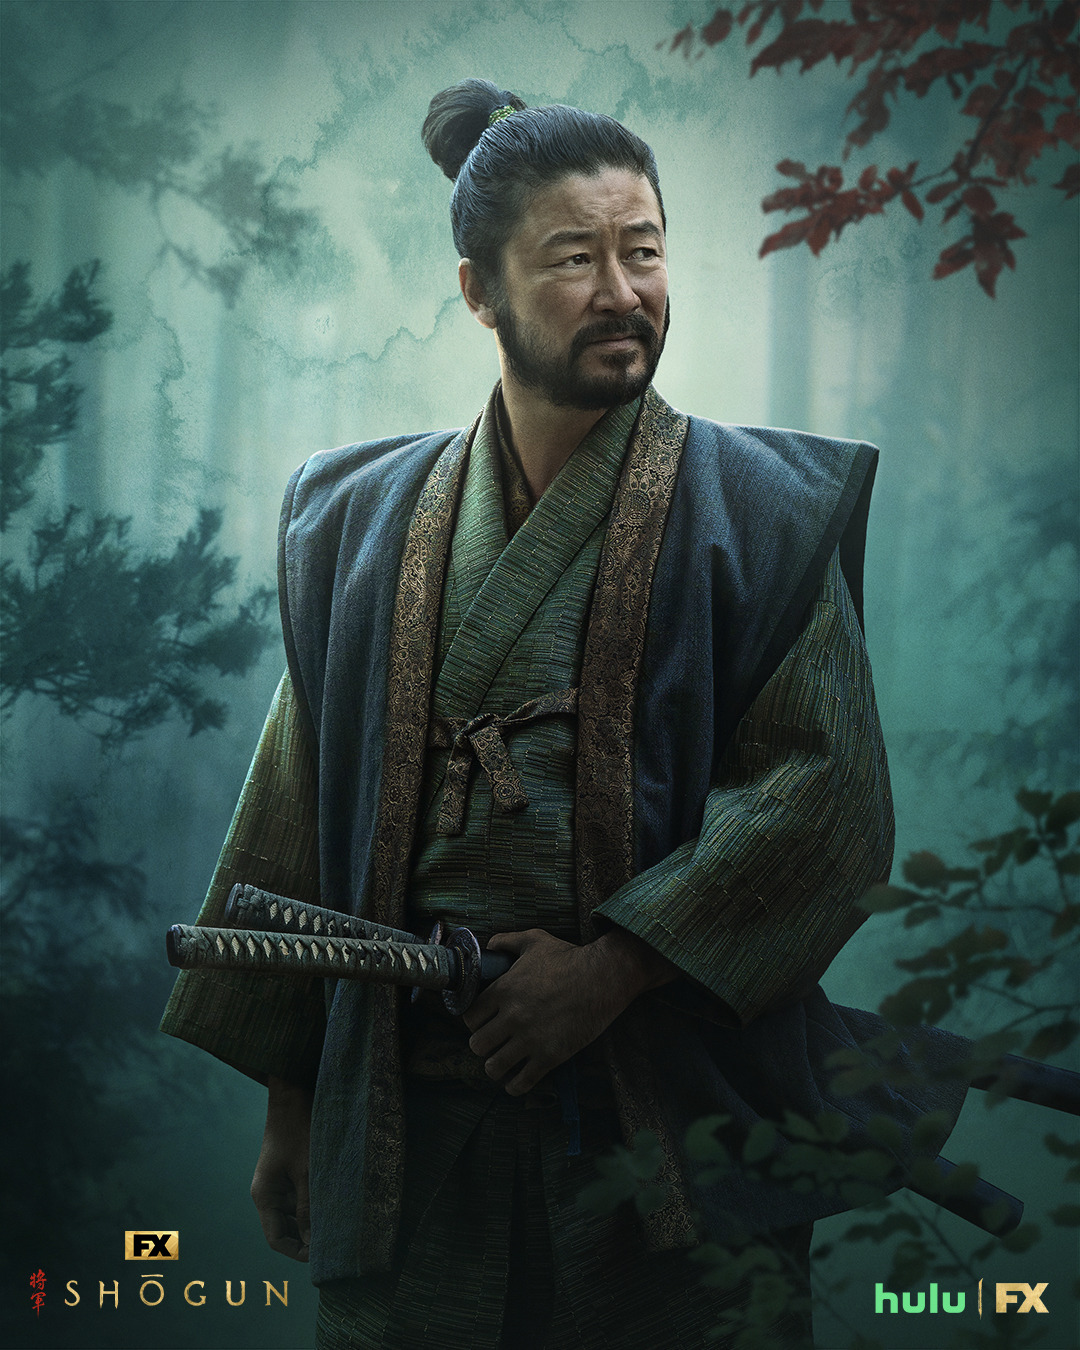 Extra Large TV Poster Image for Shogun (#16 of 24)